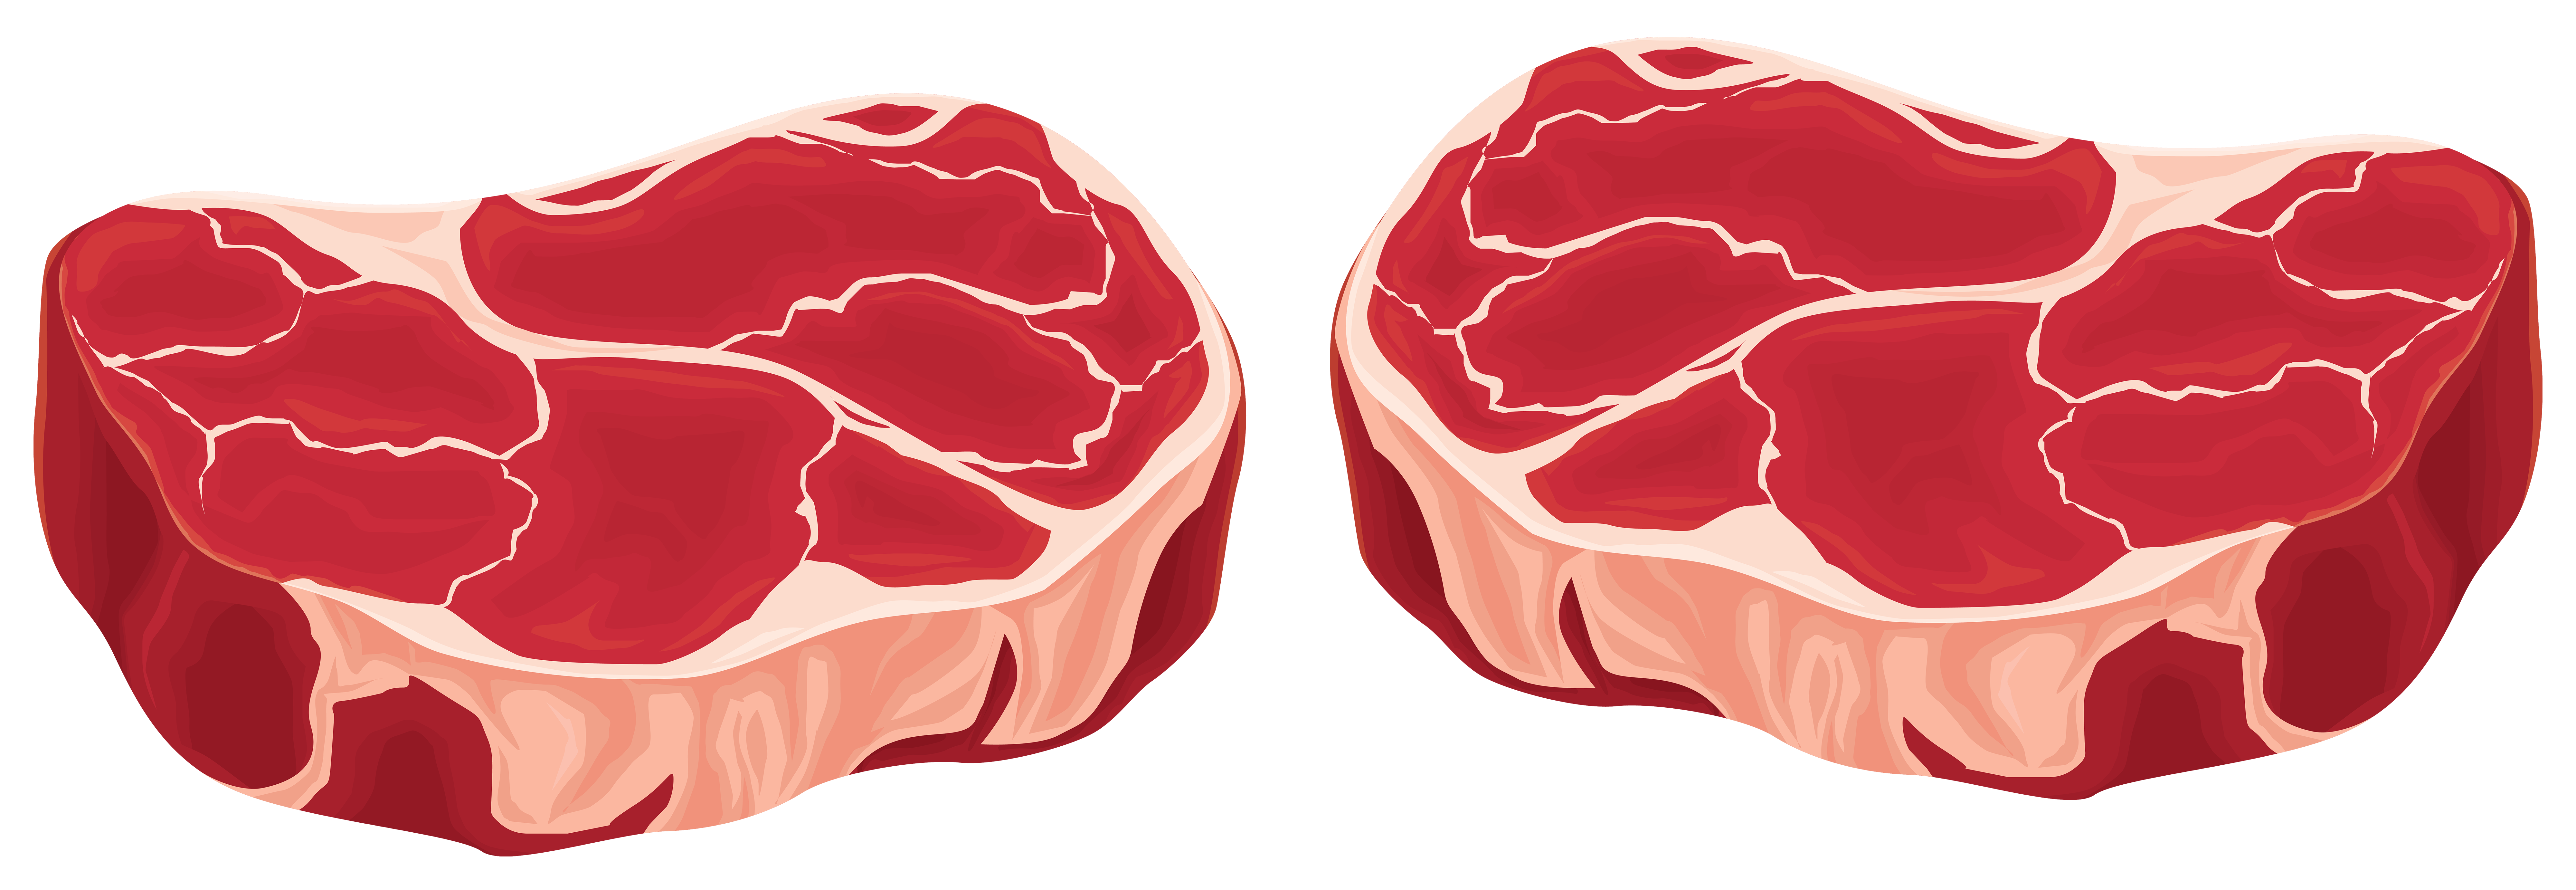 clipart beef - photo #23